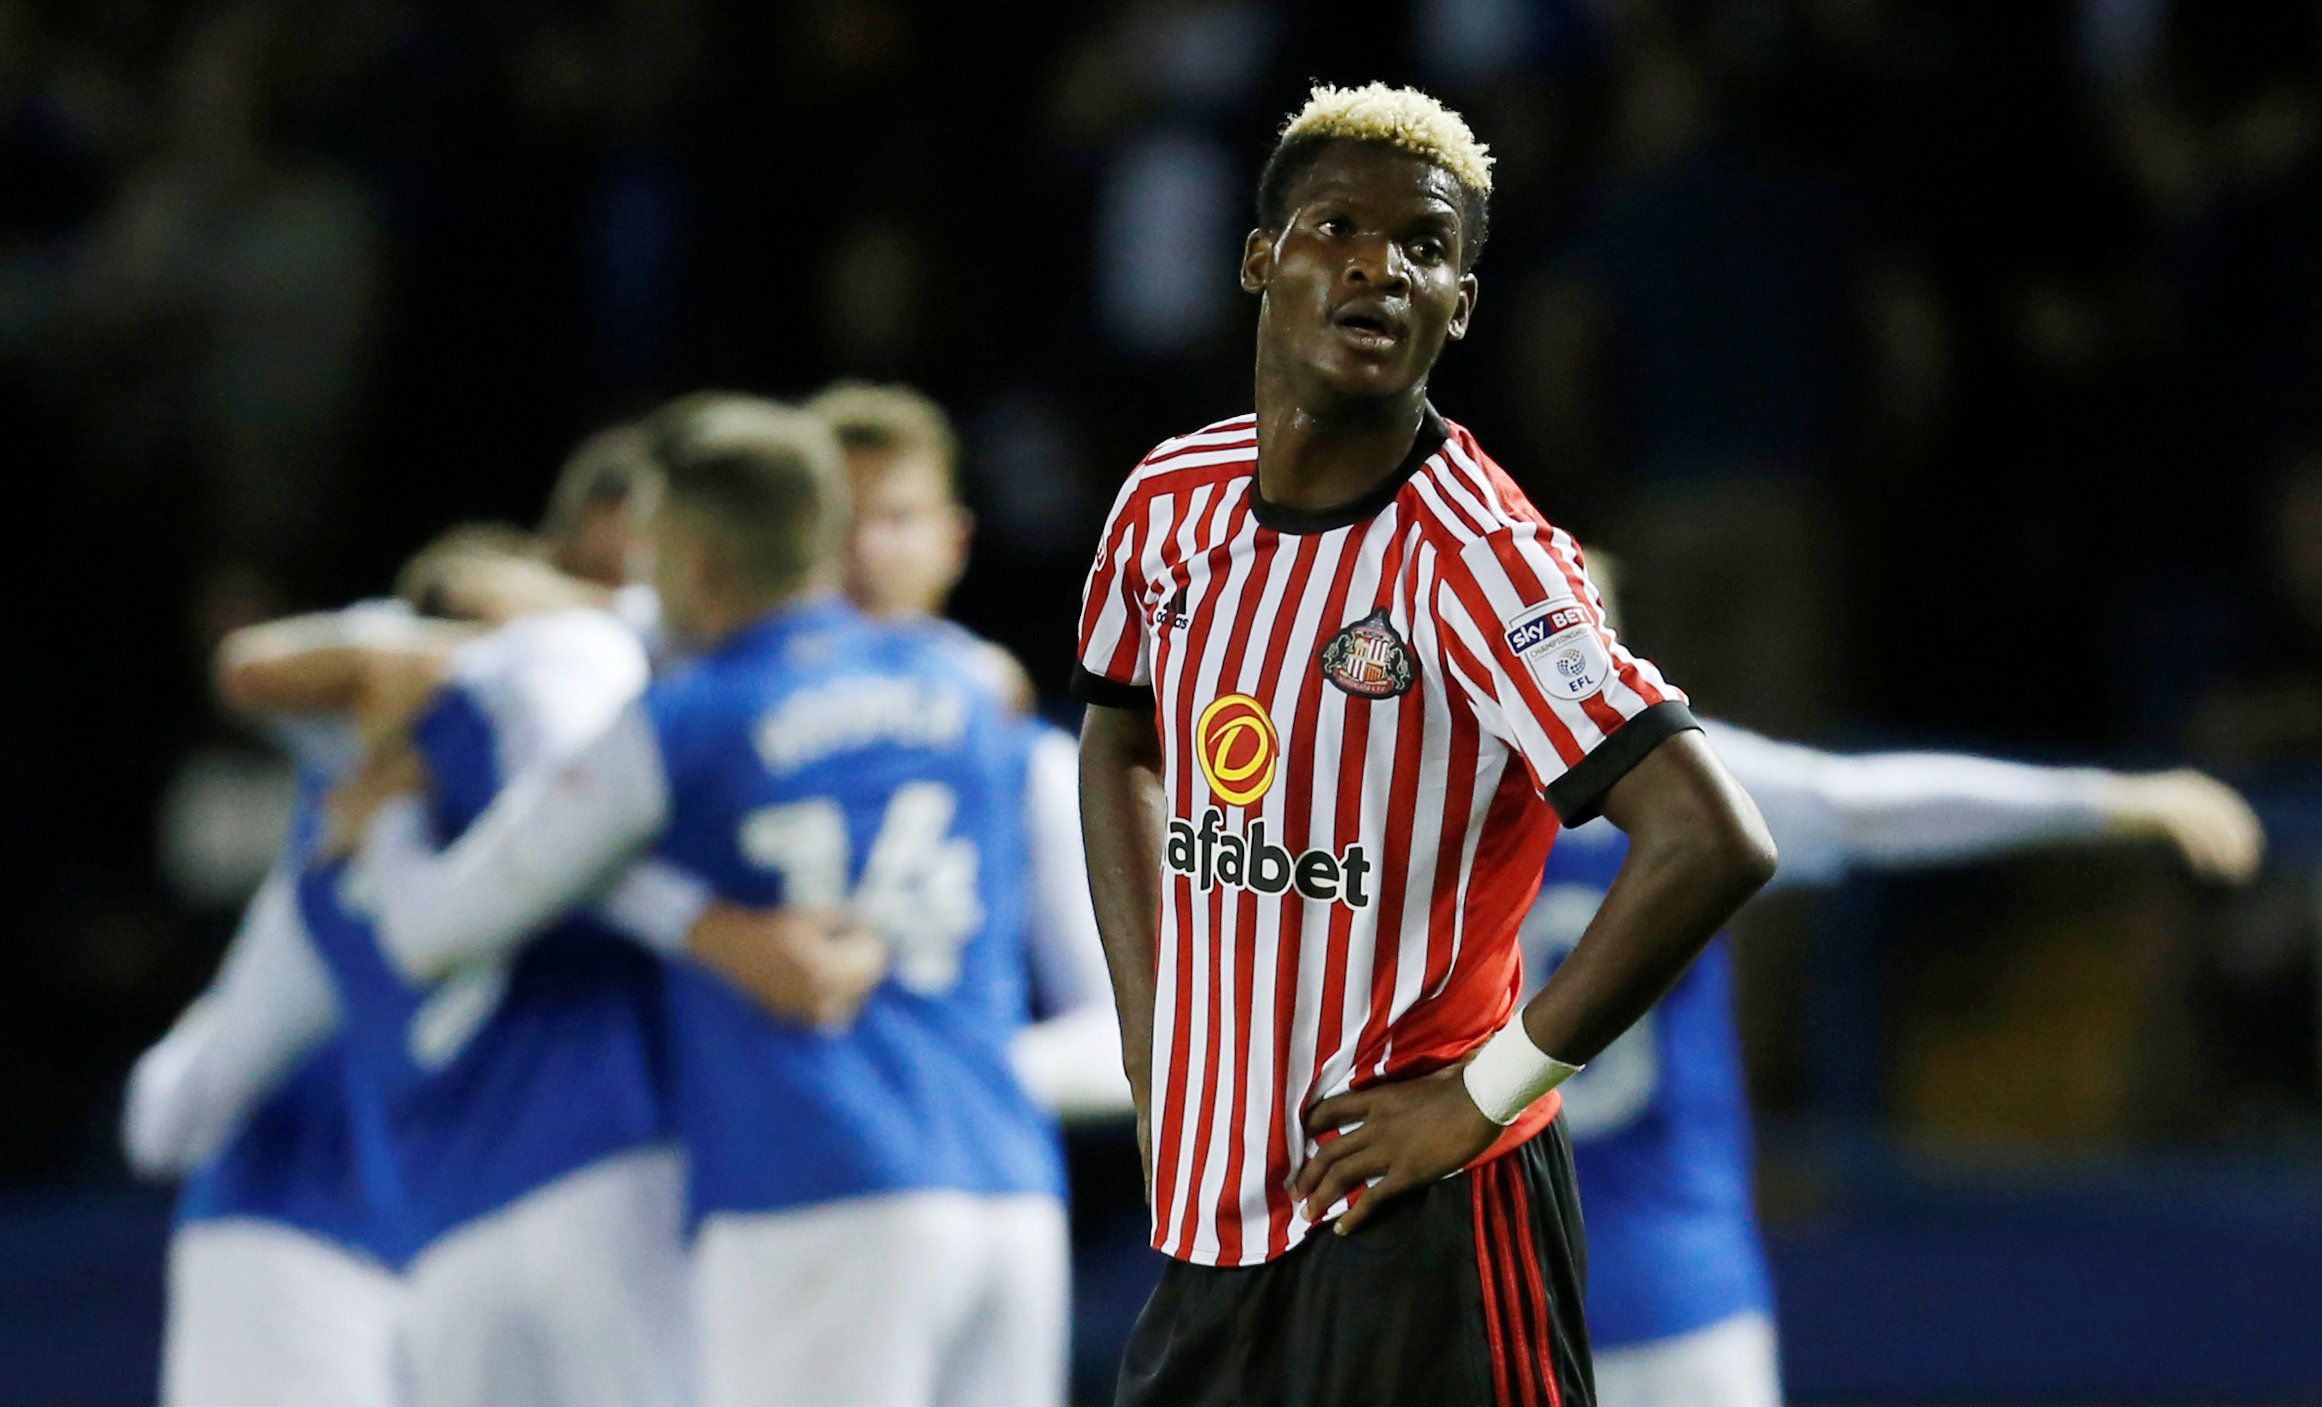 Soccer Football - Championship - Sheffield Wednesday vs Sunderland - Sheffield, Britain - August 16, 2017   Sunderland's Didier Ndong looks dejected as Sheffield Wednesday celebrate their first goal    Action Images/Ed Sykes    EDITORIAL USE ONLY. No use with unauthorized audio, video, data, fixture lists, club/league logos or 